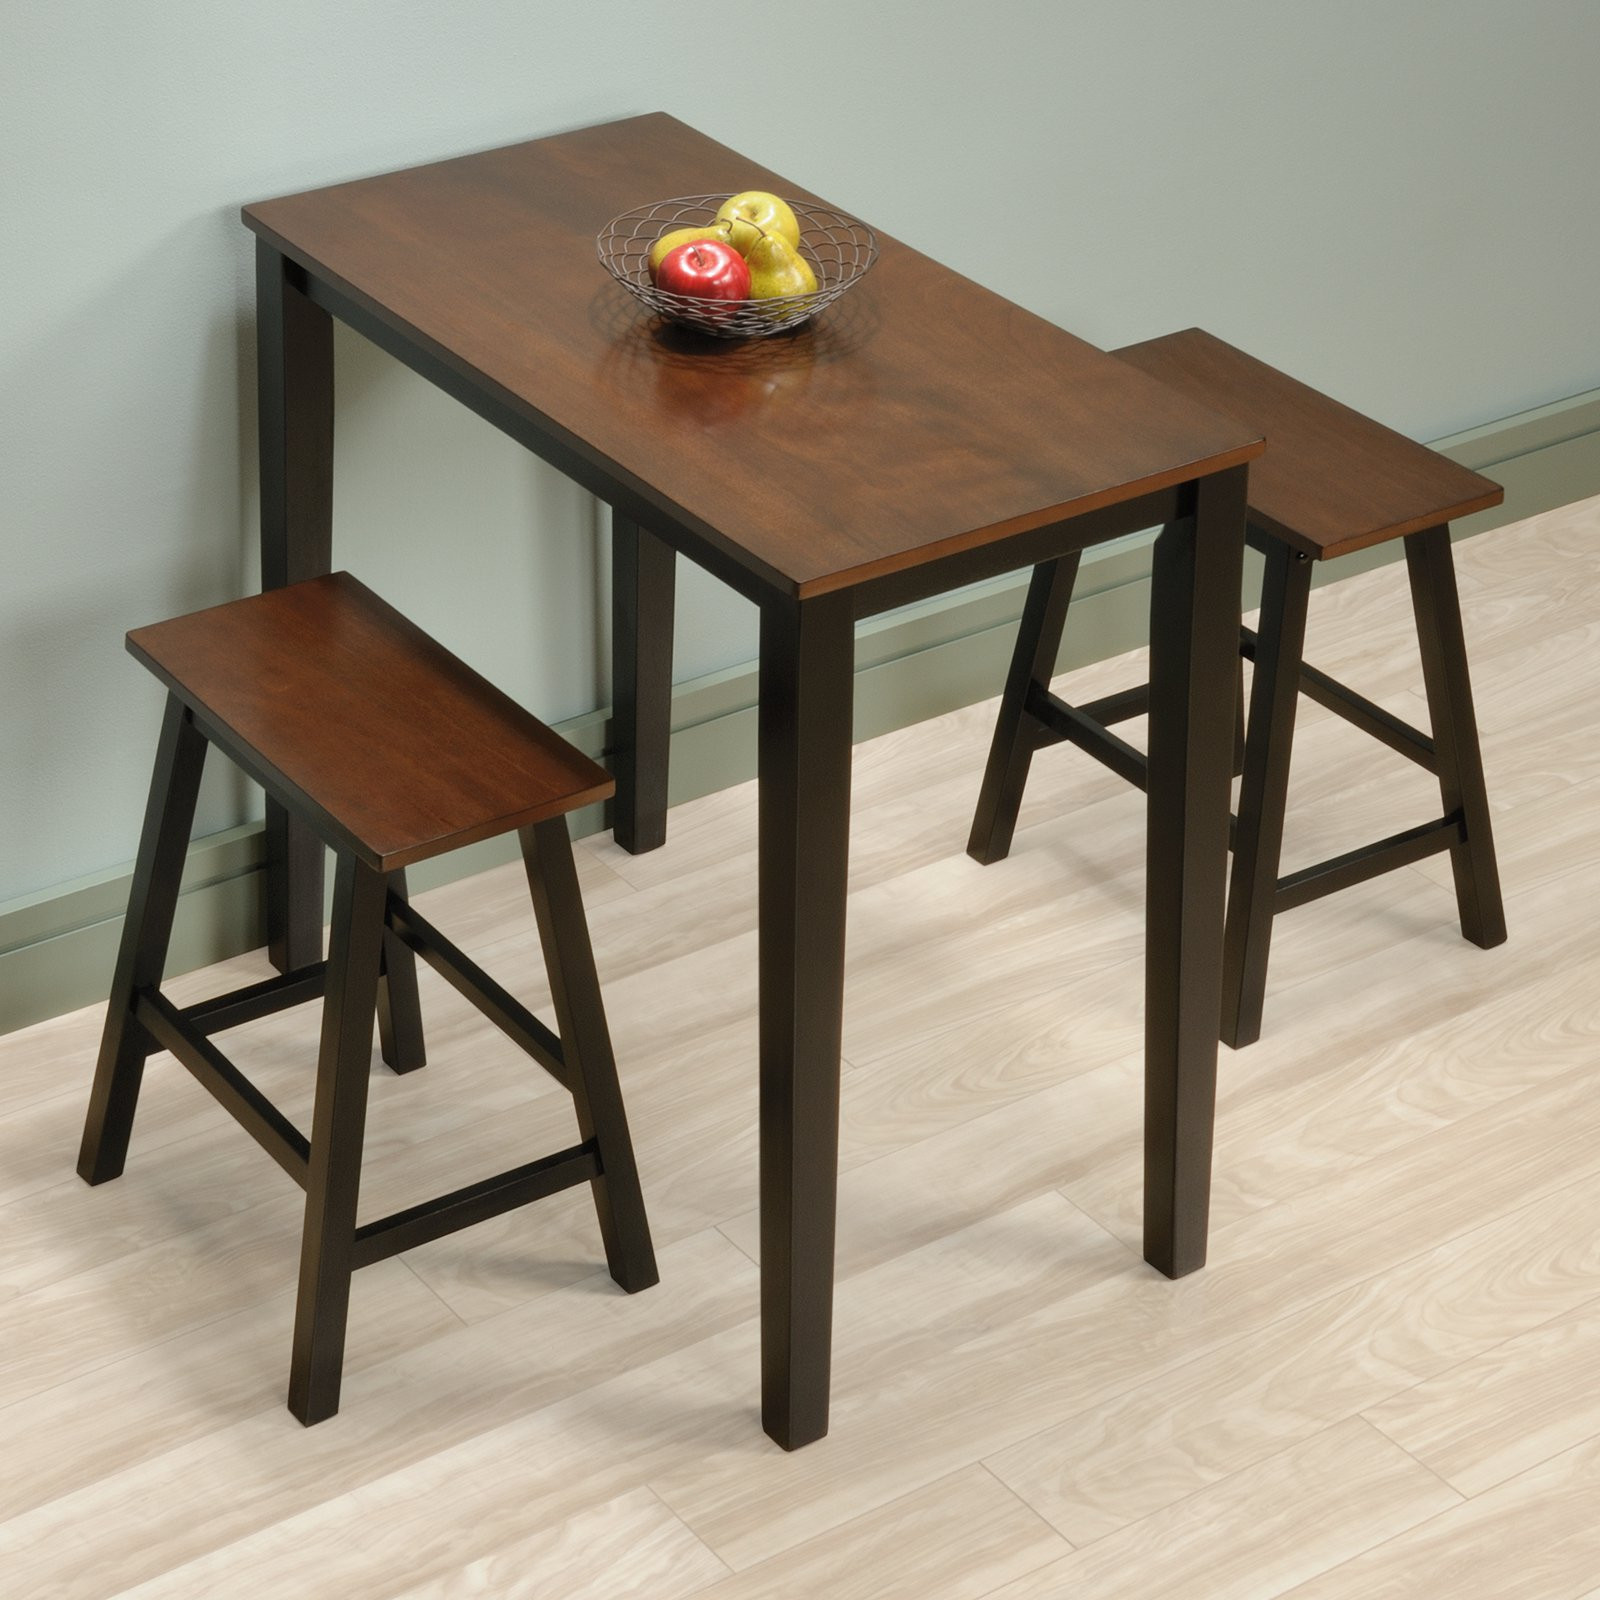 Counter Height Small Kitchen Table
 Sauder Beginnings 3 Piece Counter Height Dining Set